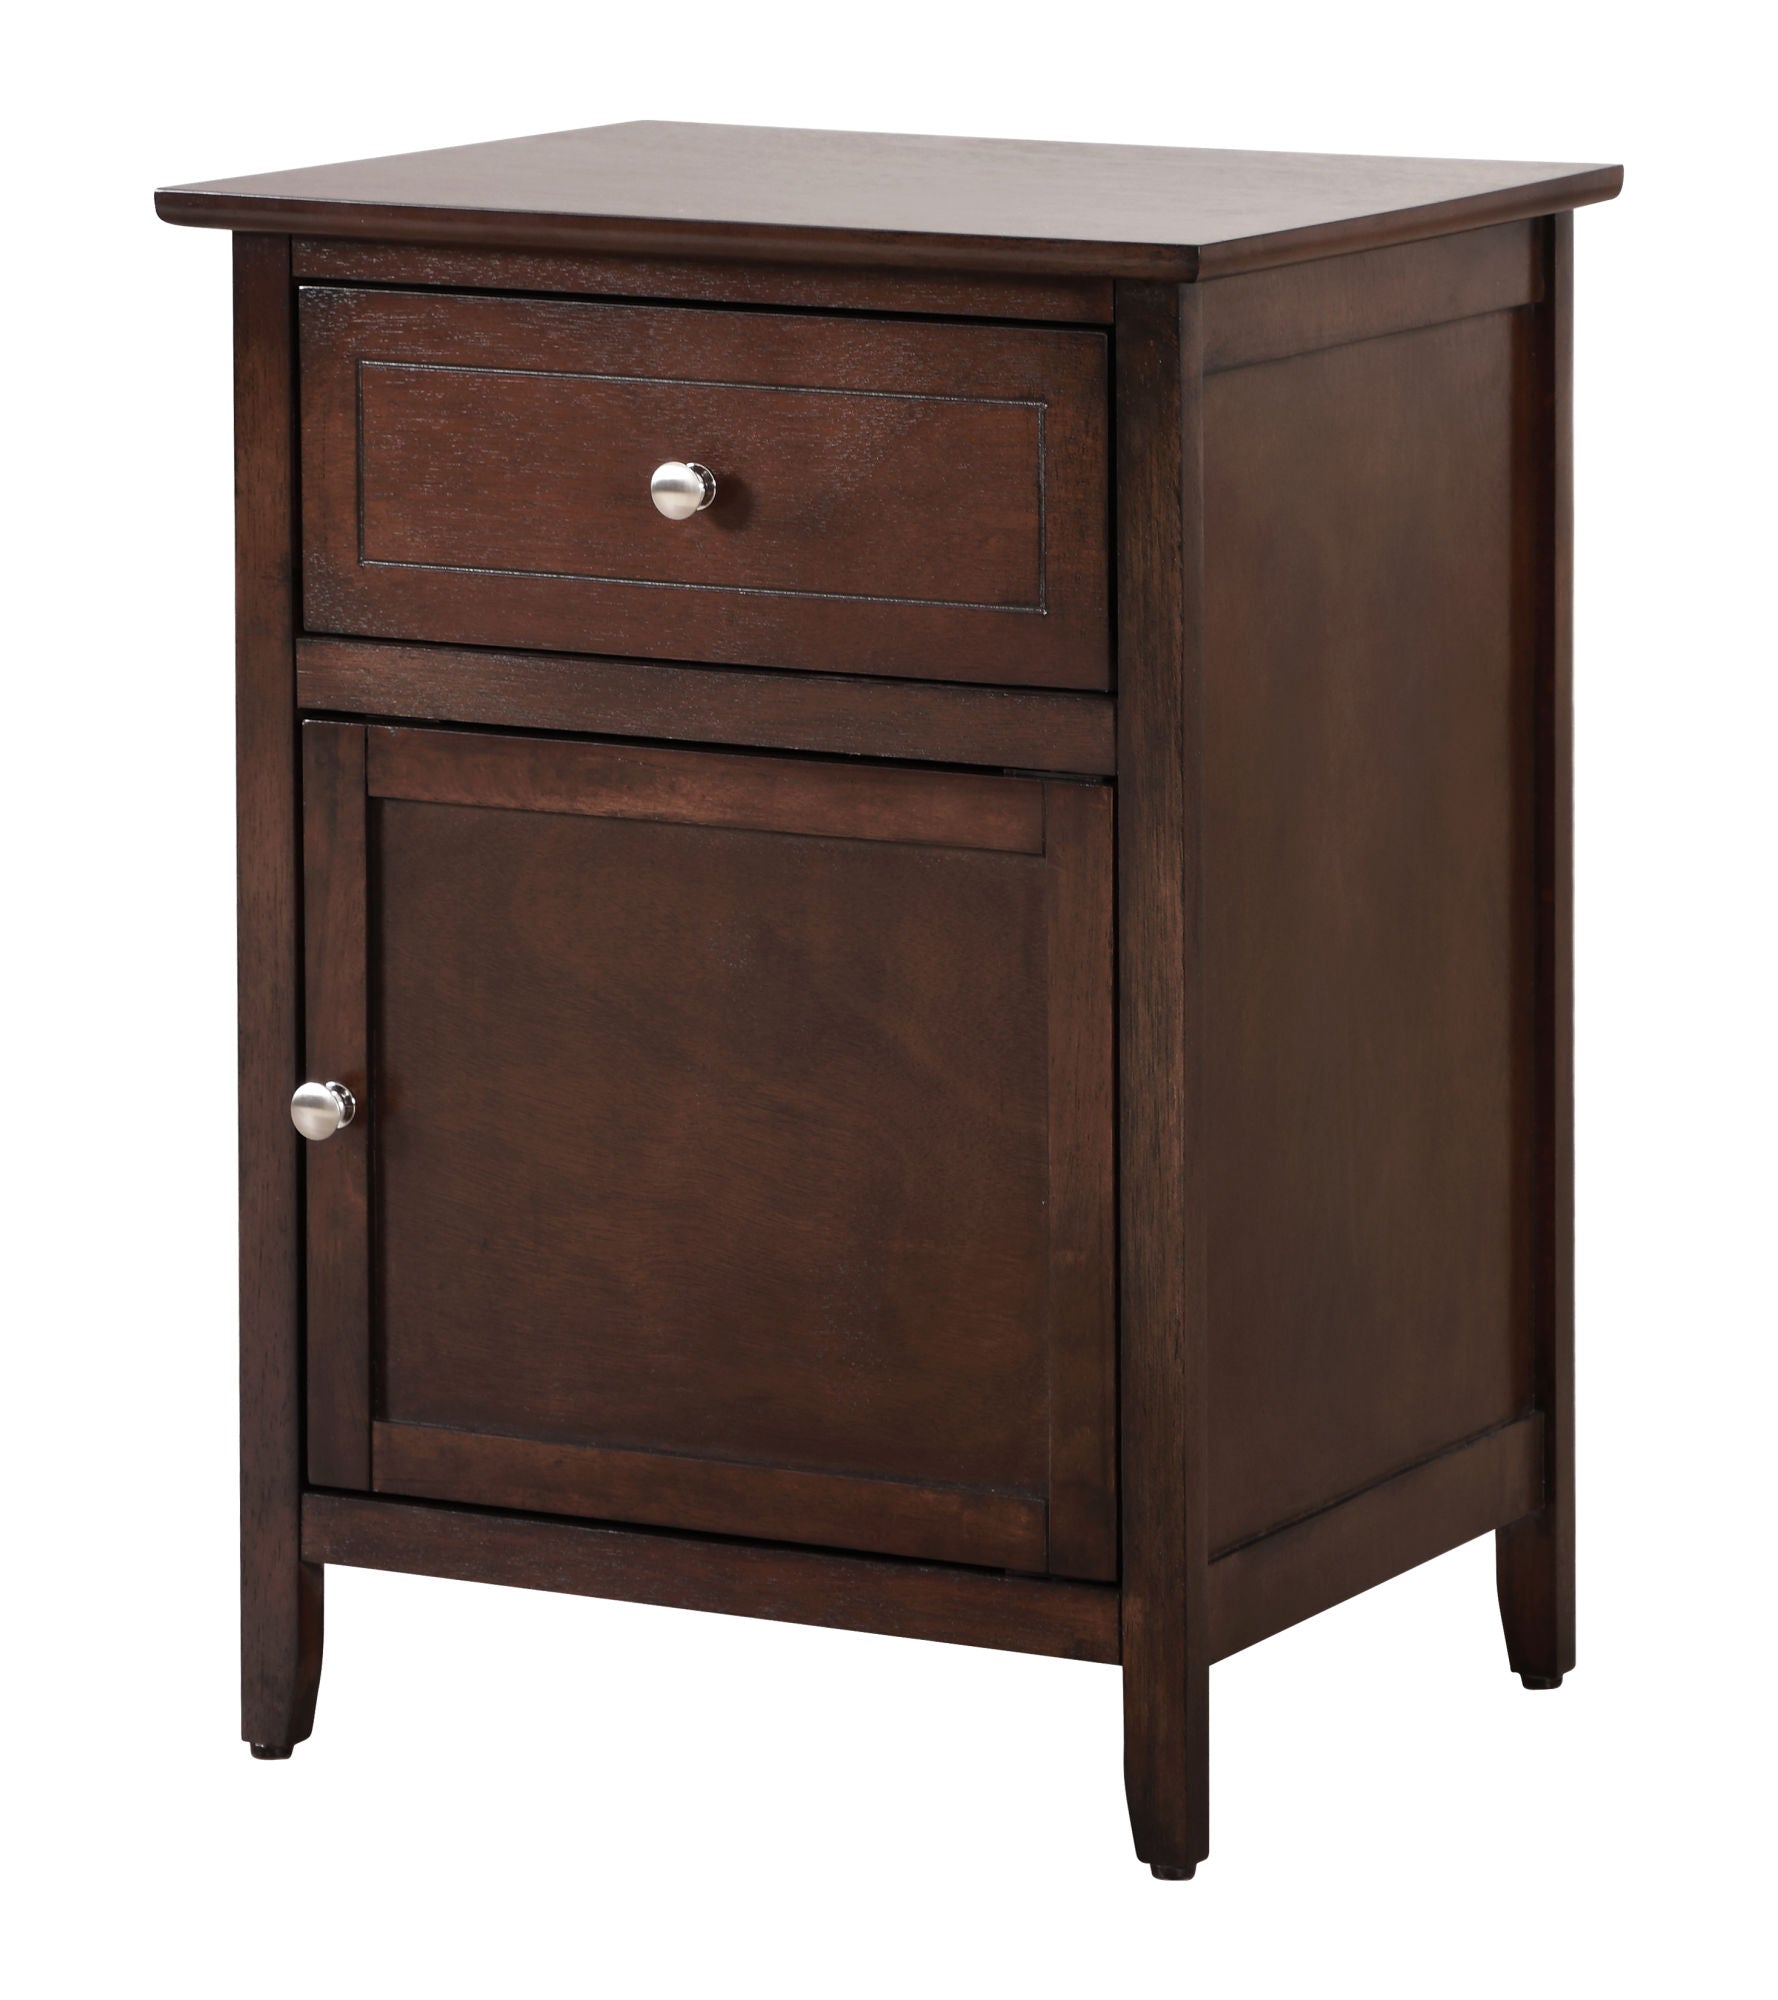 Glory Furniture Izzy G1412-N-25 1 Drawer /1 Door Nightstand , Cappuccino Home Decor by Design